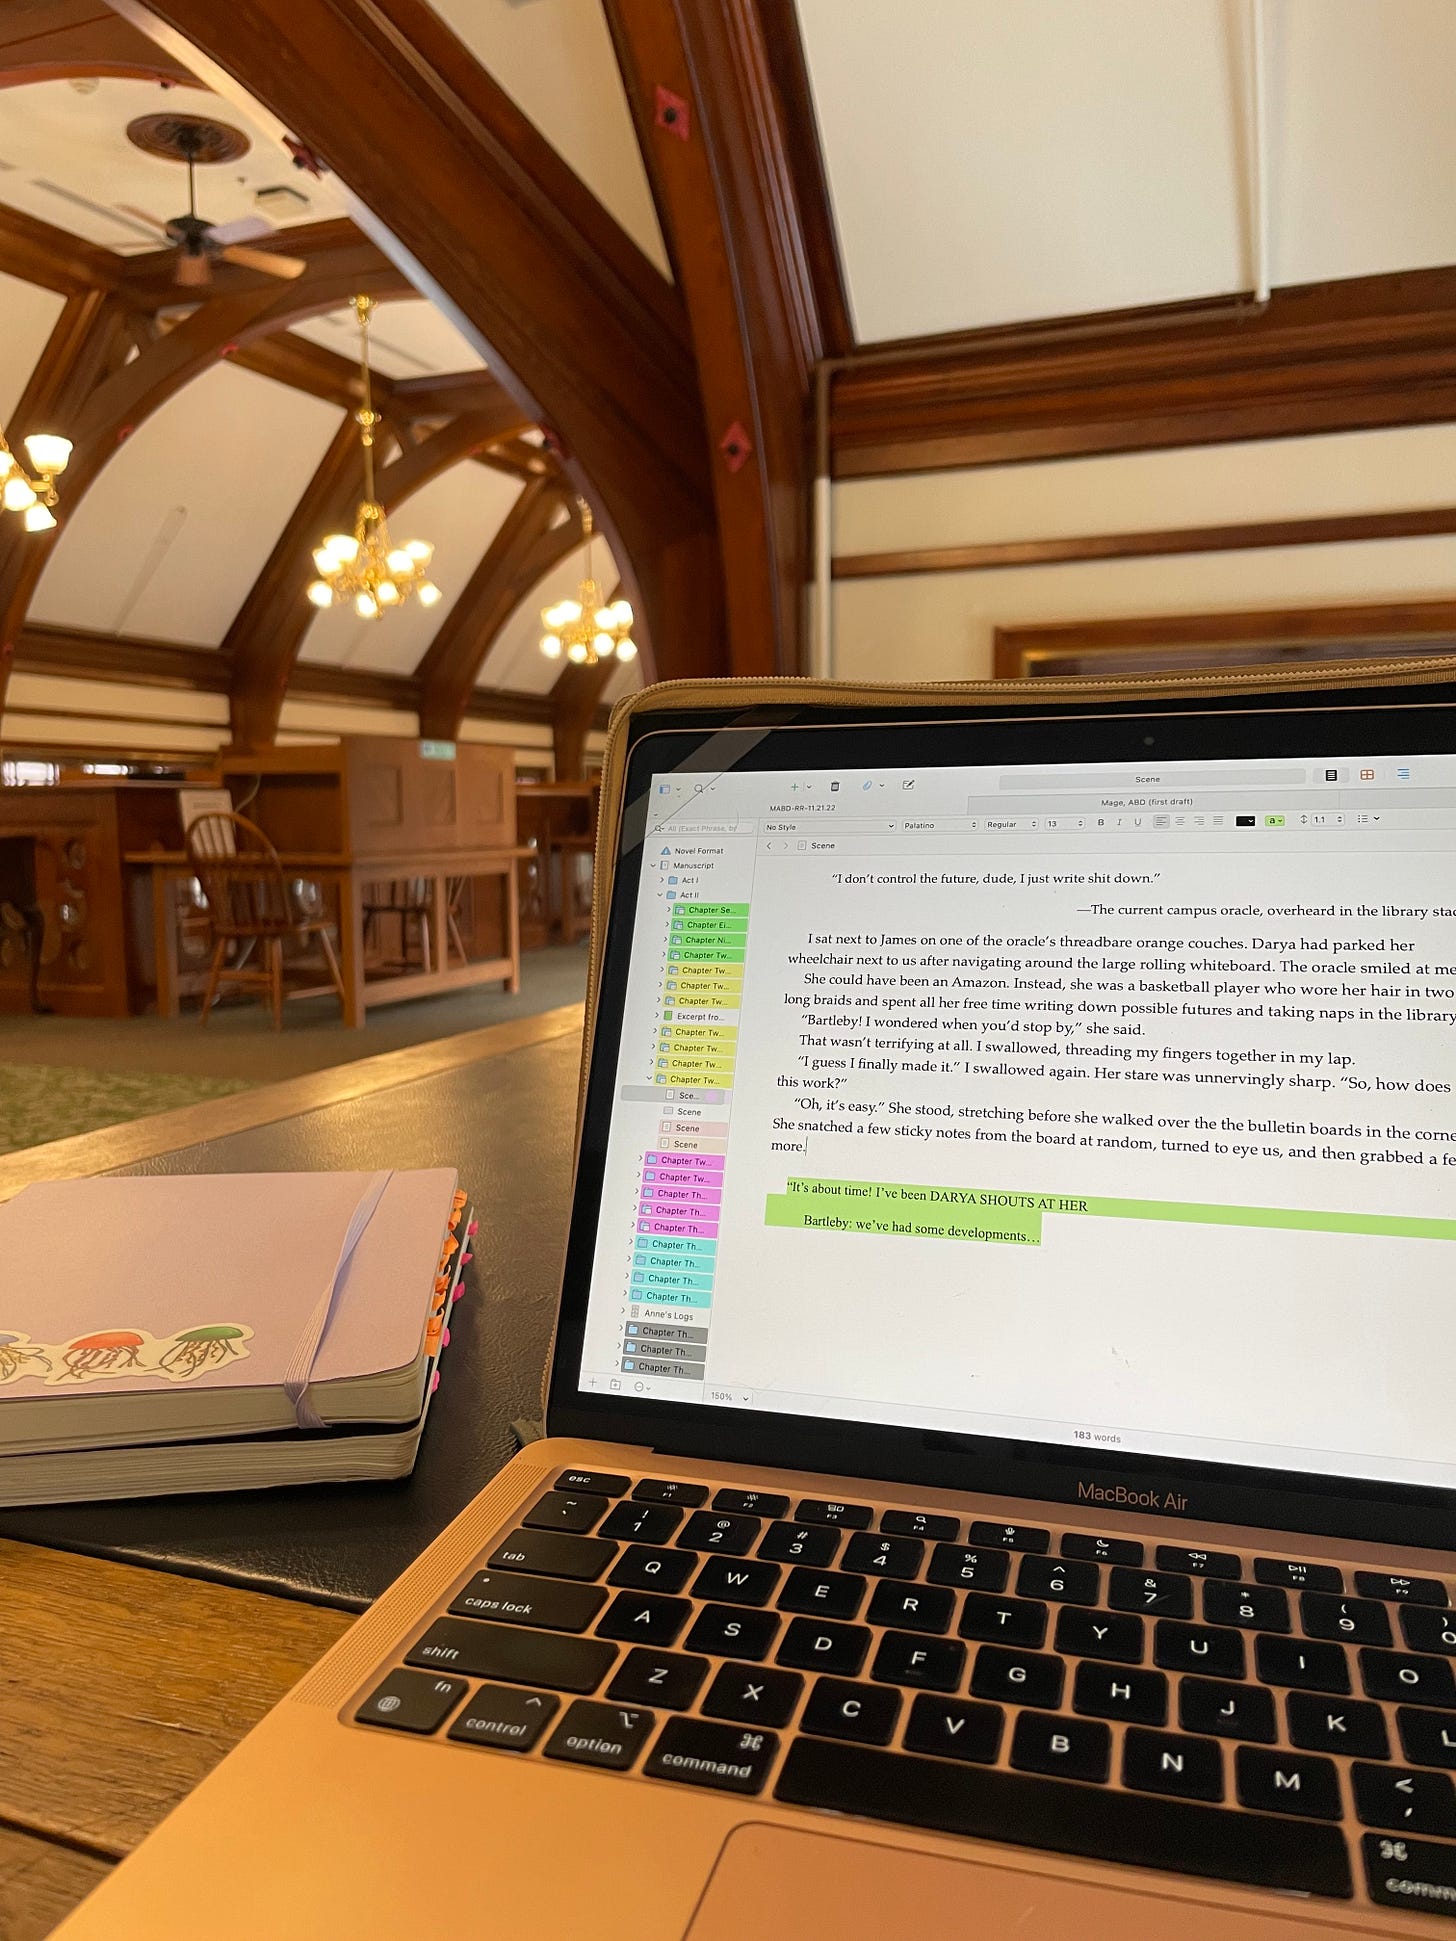 My laptop with color-coded scrivener project open. In the background, a beautiful library with chandeliers. 